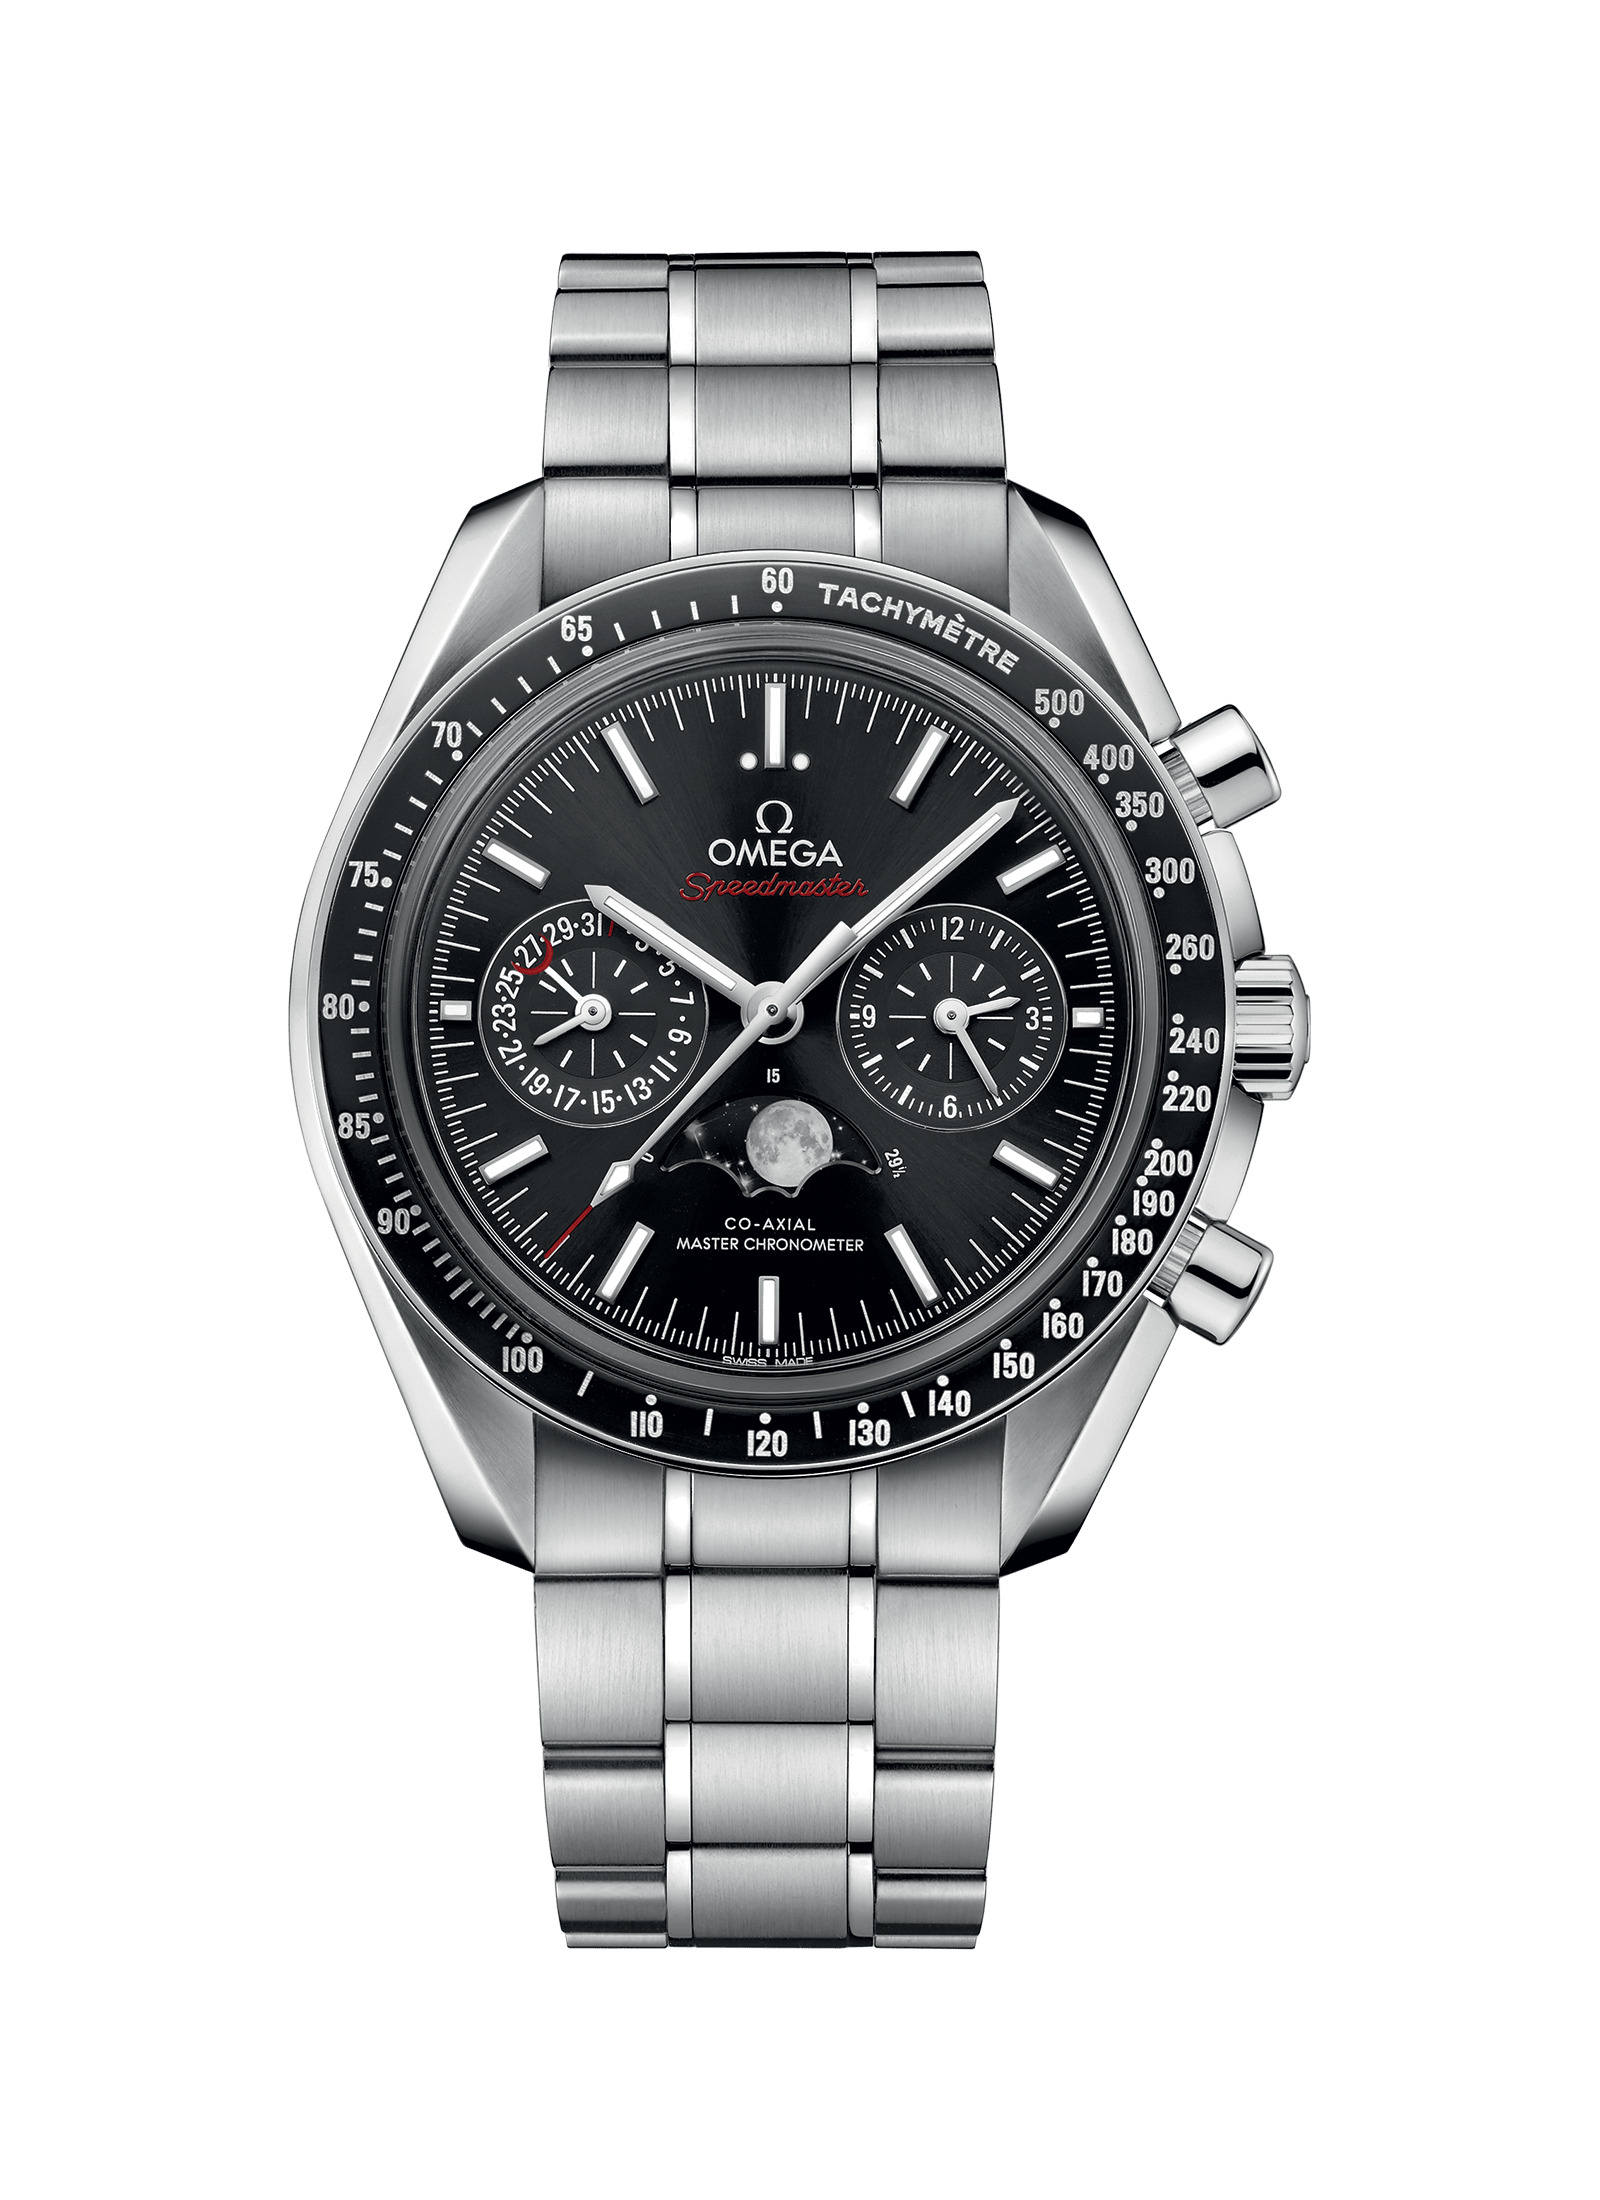 omega-speedmaster-moonwatch-omega-co-axial-master-chronometer-moonphase-chronograph-44-25-mm-30430445201001-1-product-zoom.png